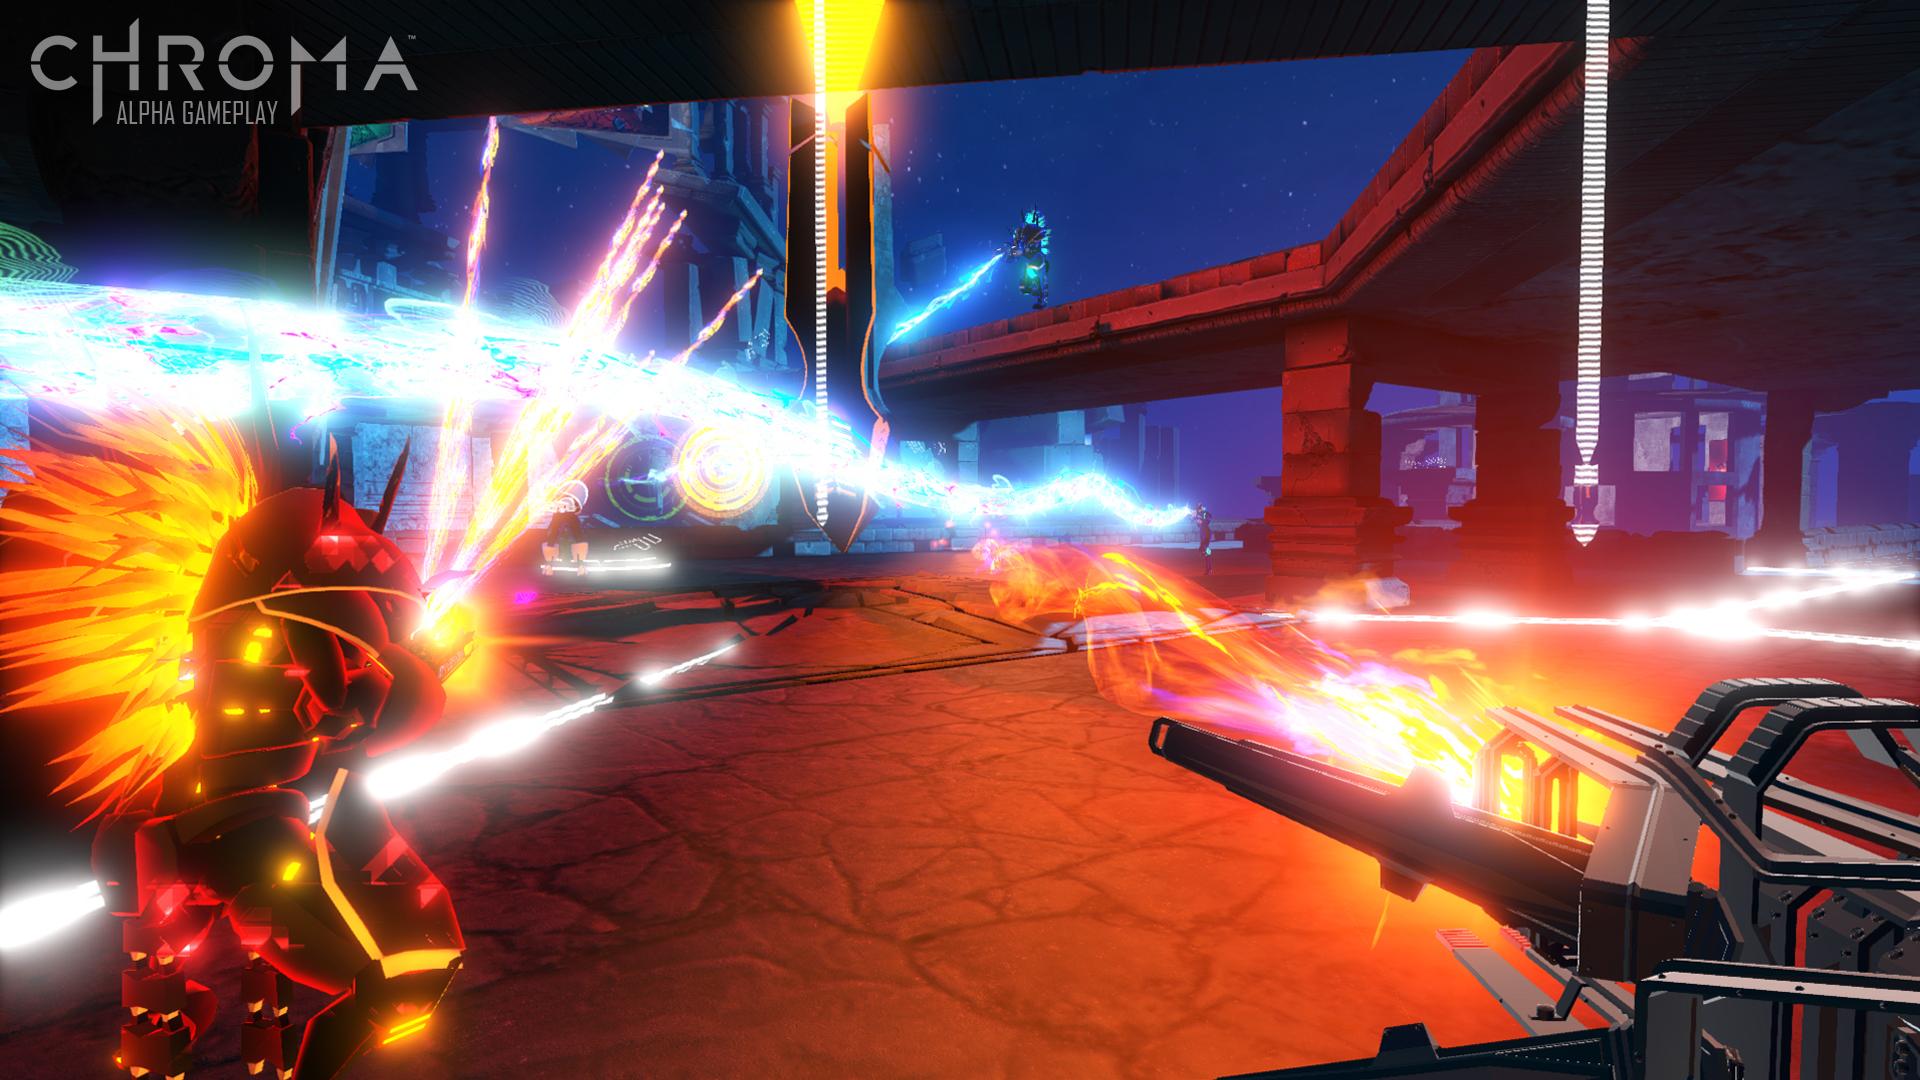 chroma mixes music first person shooting thumping neon landscapes alpha screenshot 01